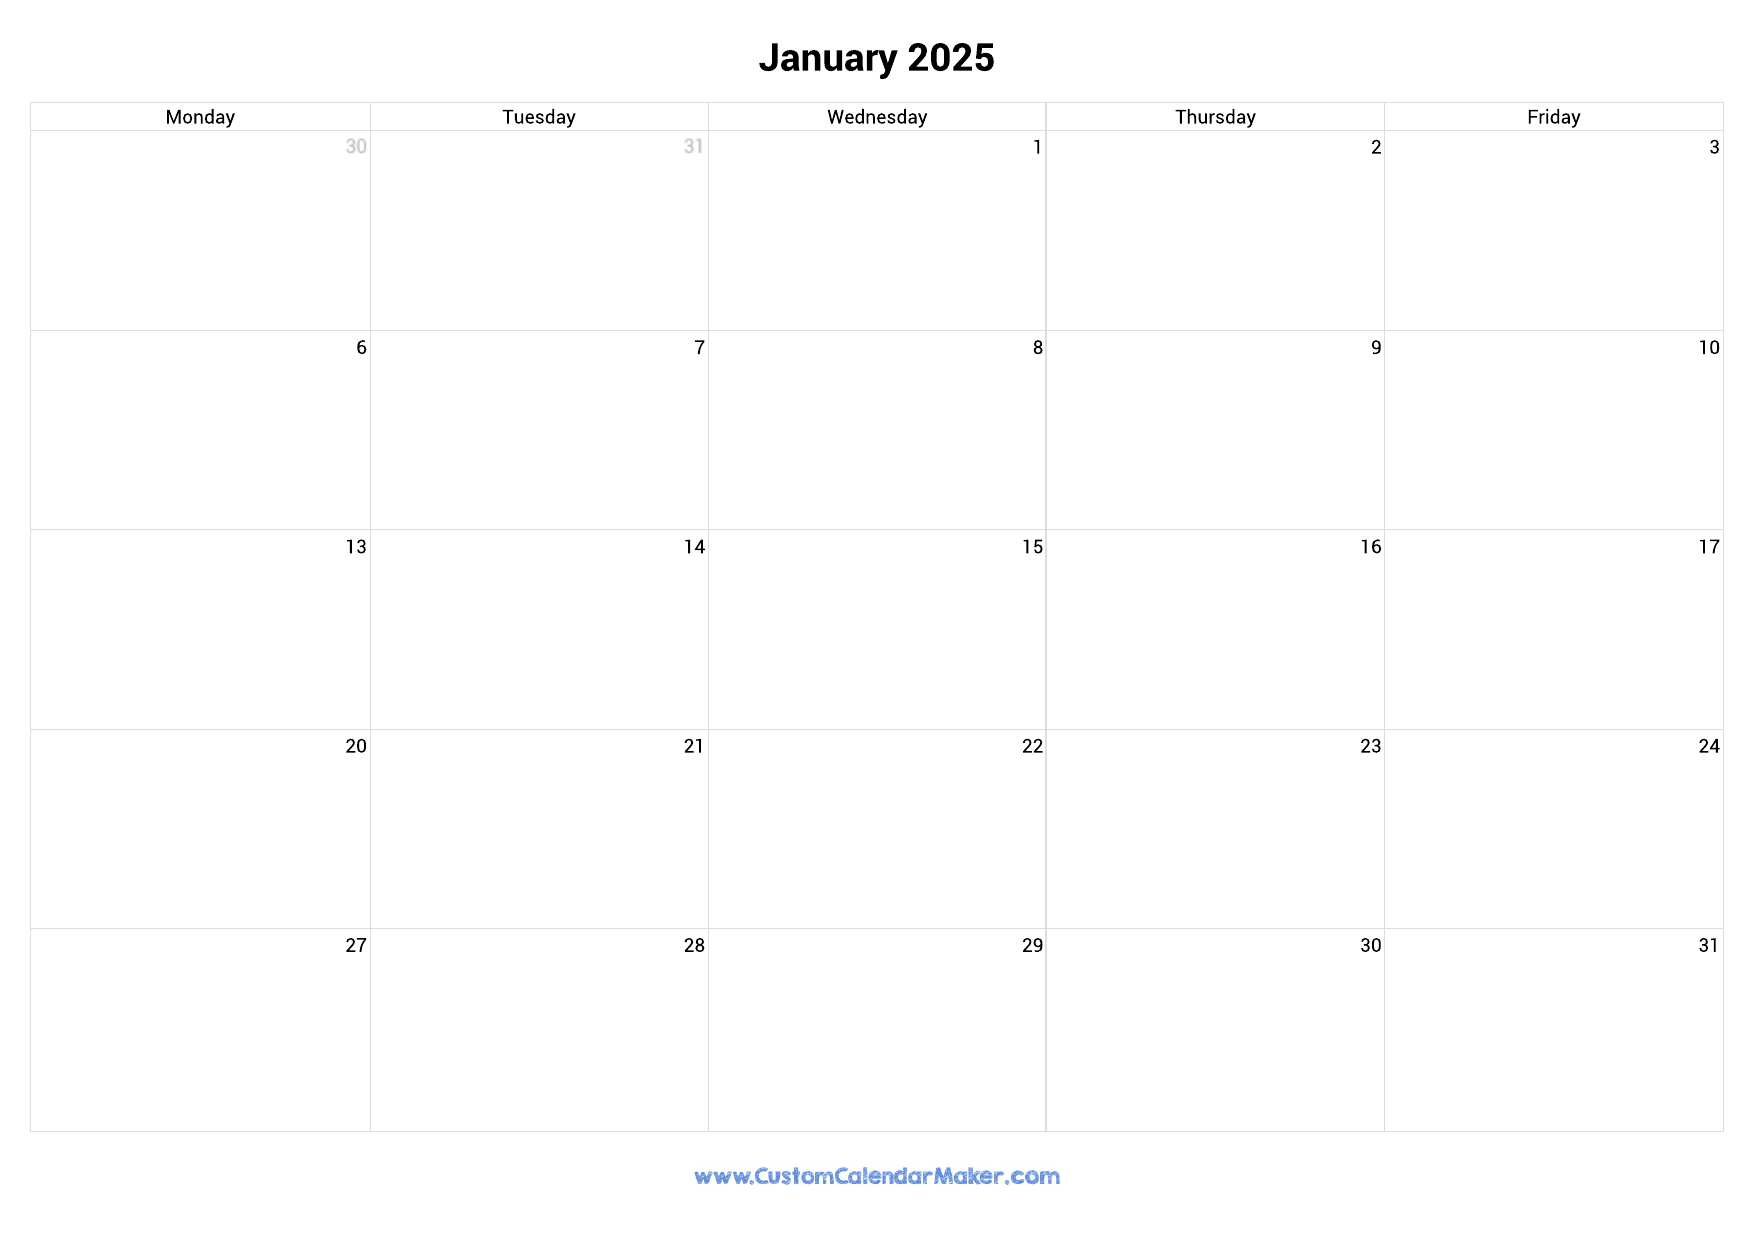 january-2025-calendar-weekdays-only-monday-to-friday